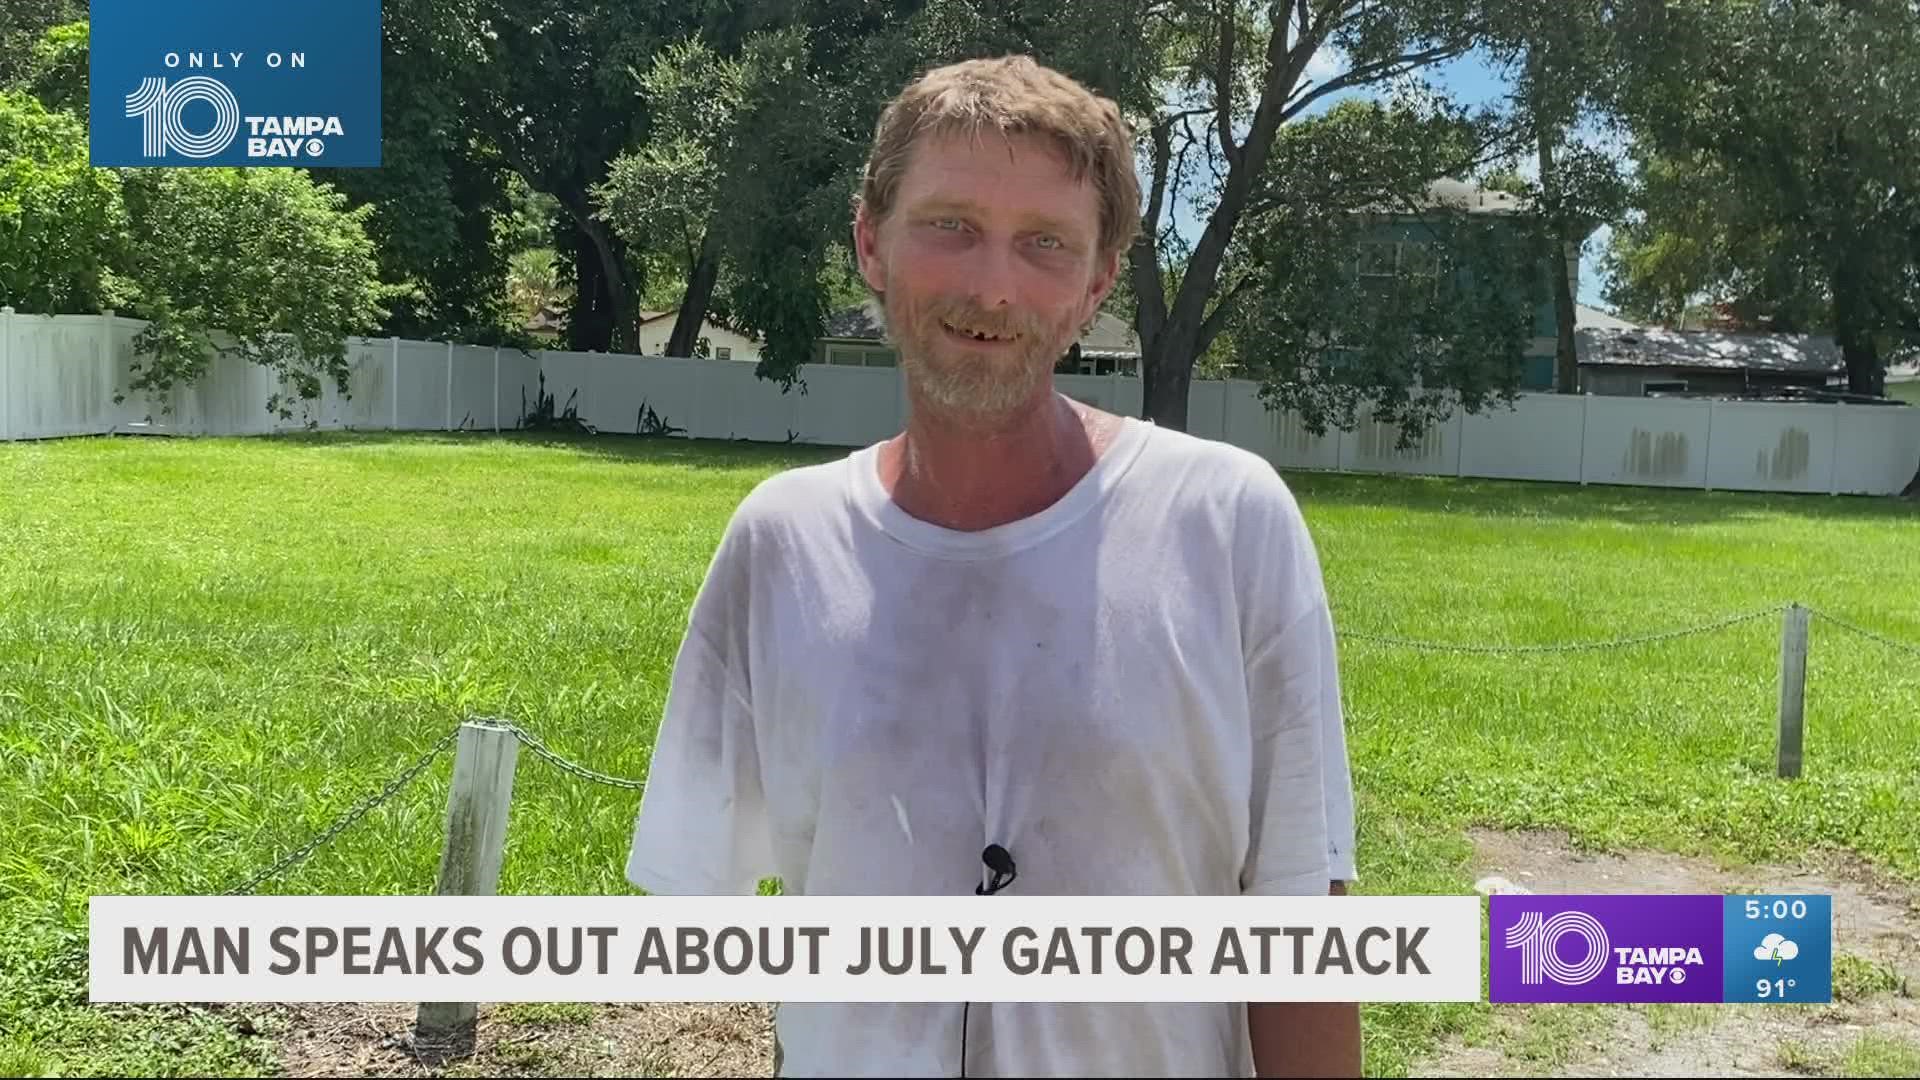 Eric Merda says he was swimming in Lake Manatee when a gator bit his arm off. He said he survived three days in the swamp after the attack.